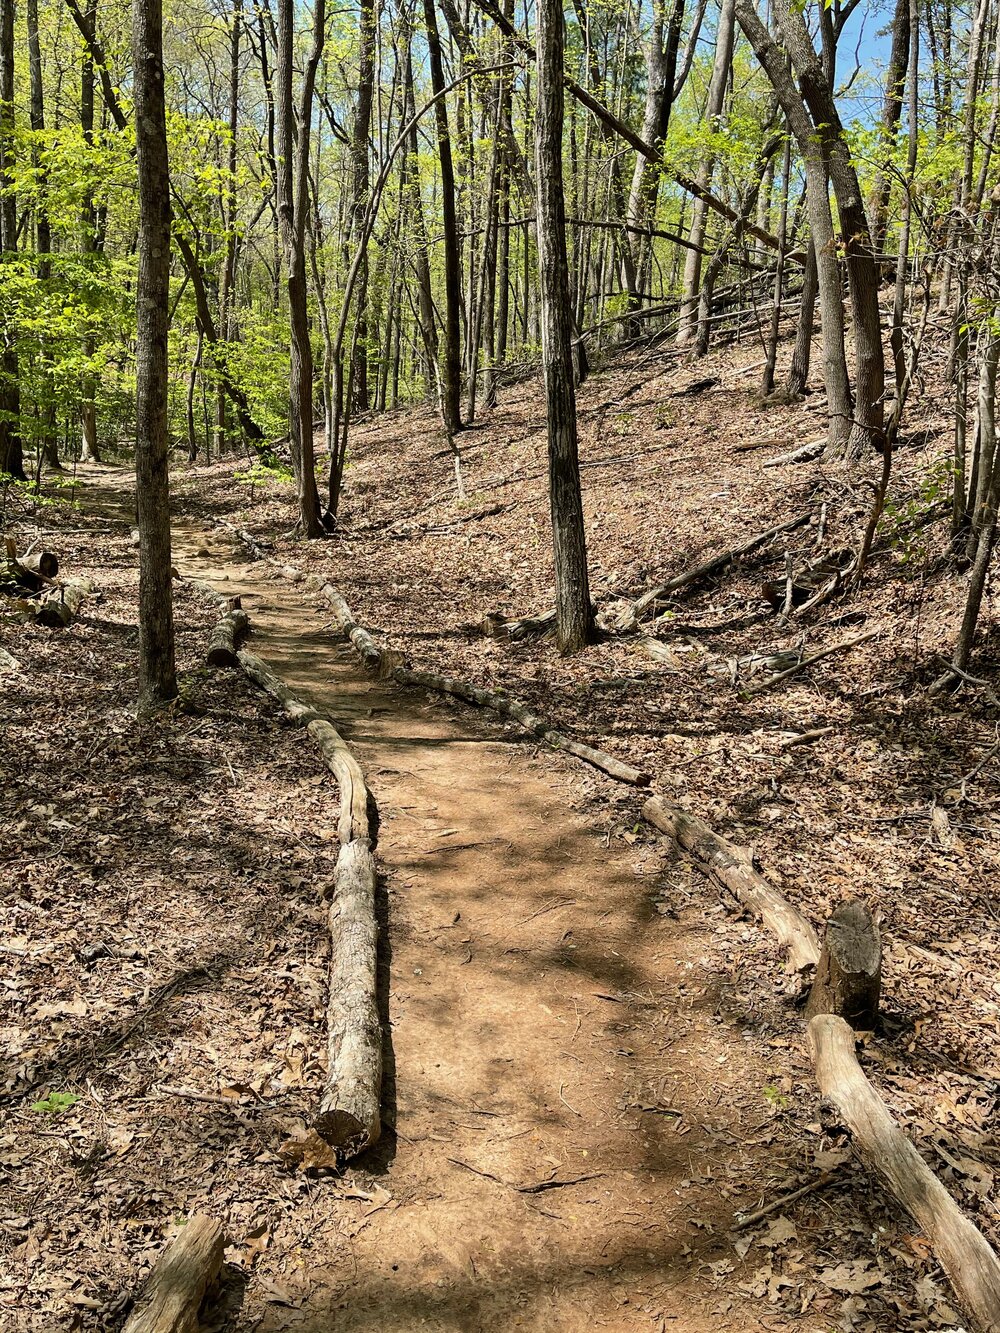 Improved delineation of trails